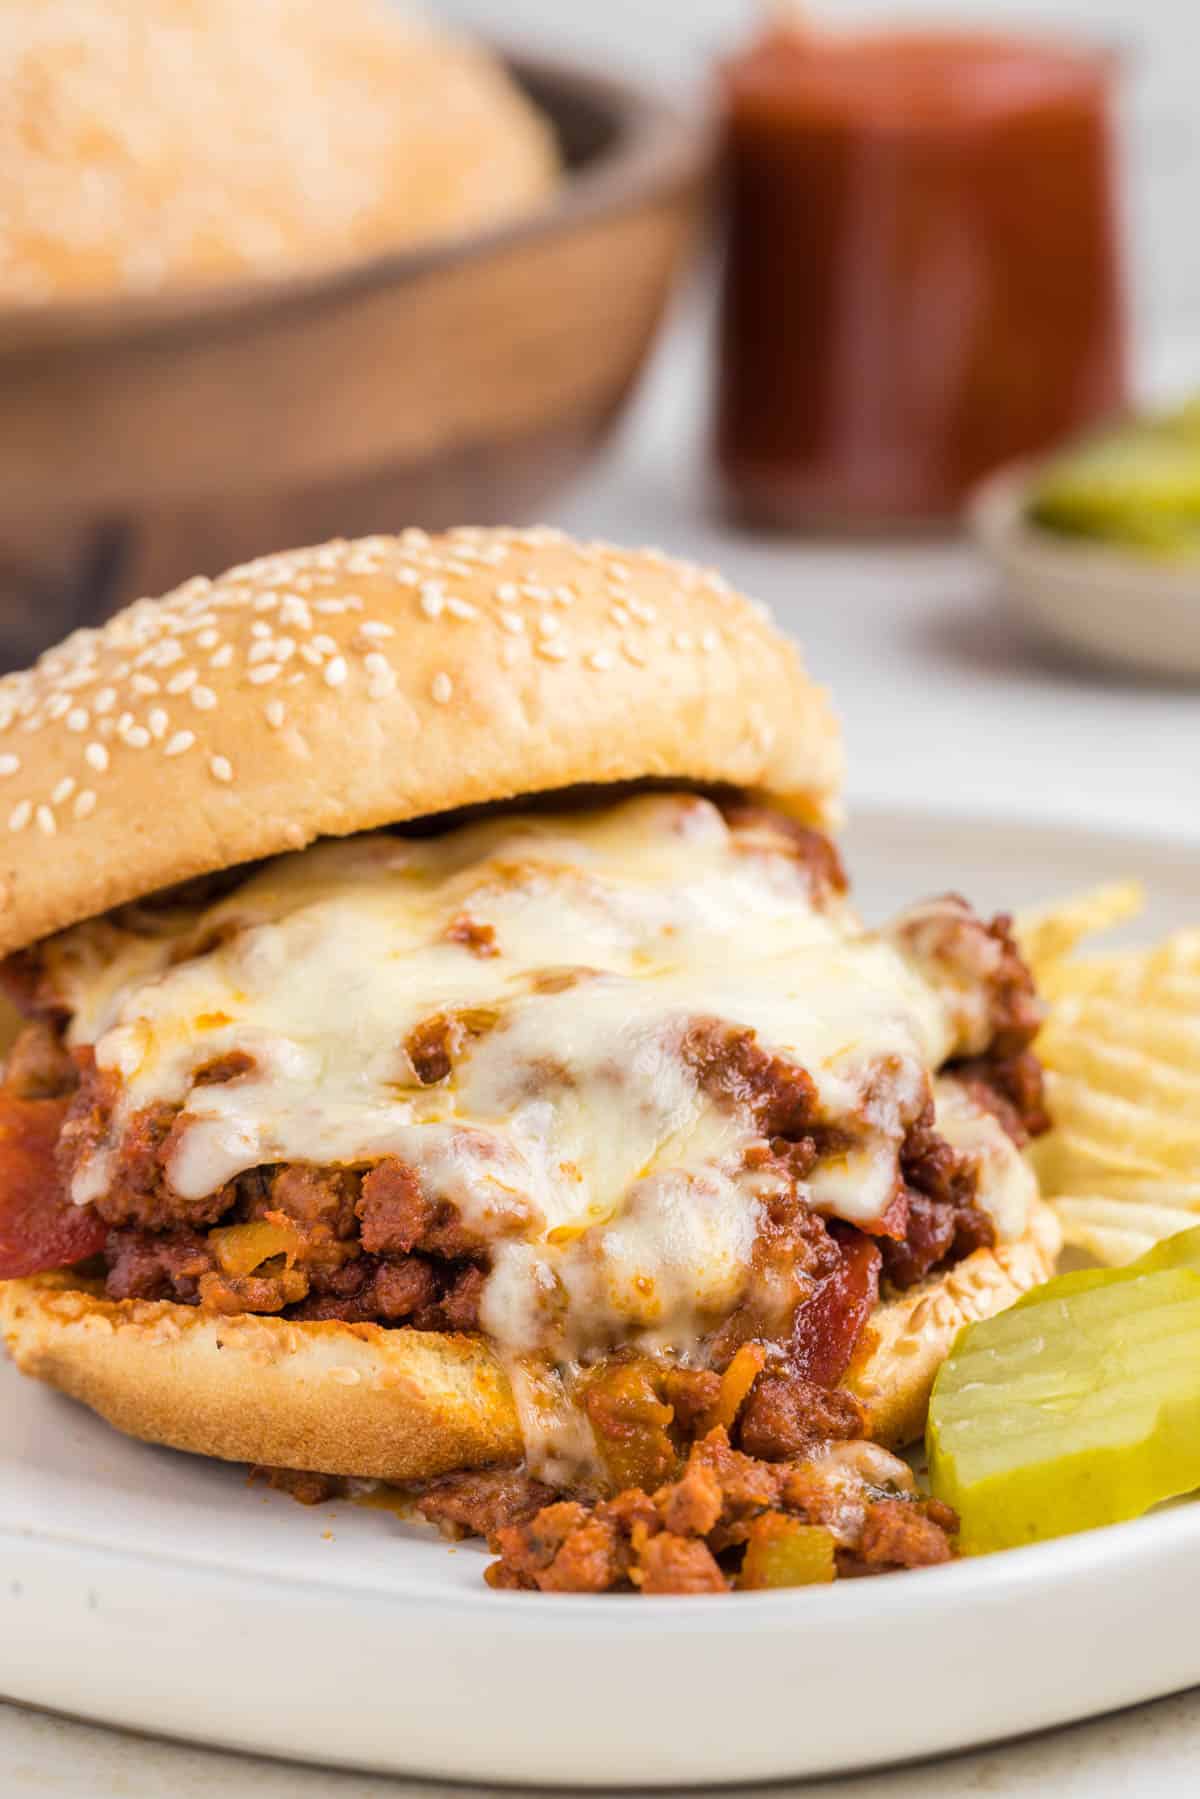 Pizza Sloppy Joe sandwich on a gray plate served with a pickle slice and chips.